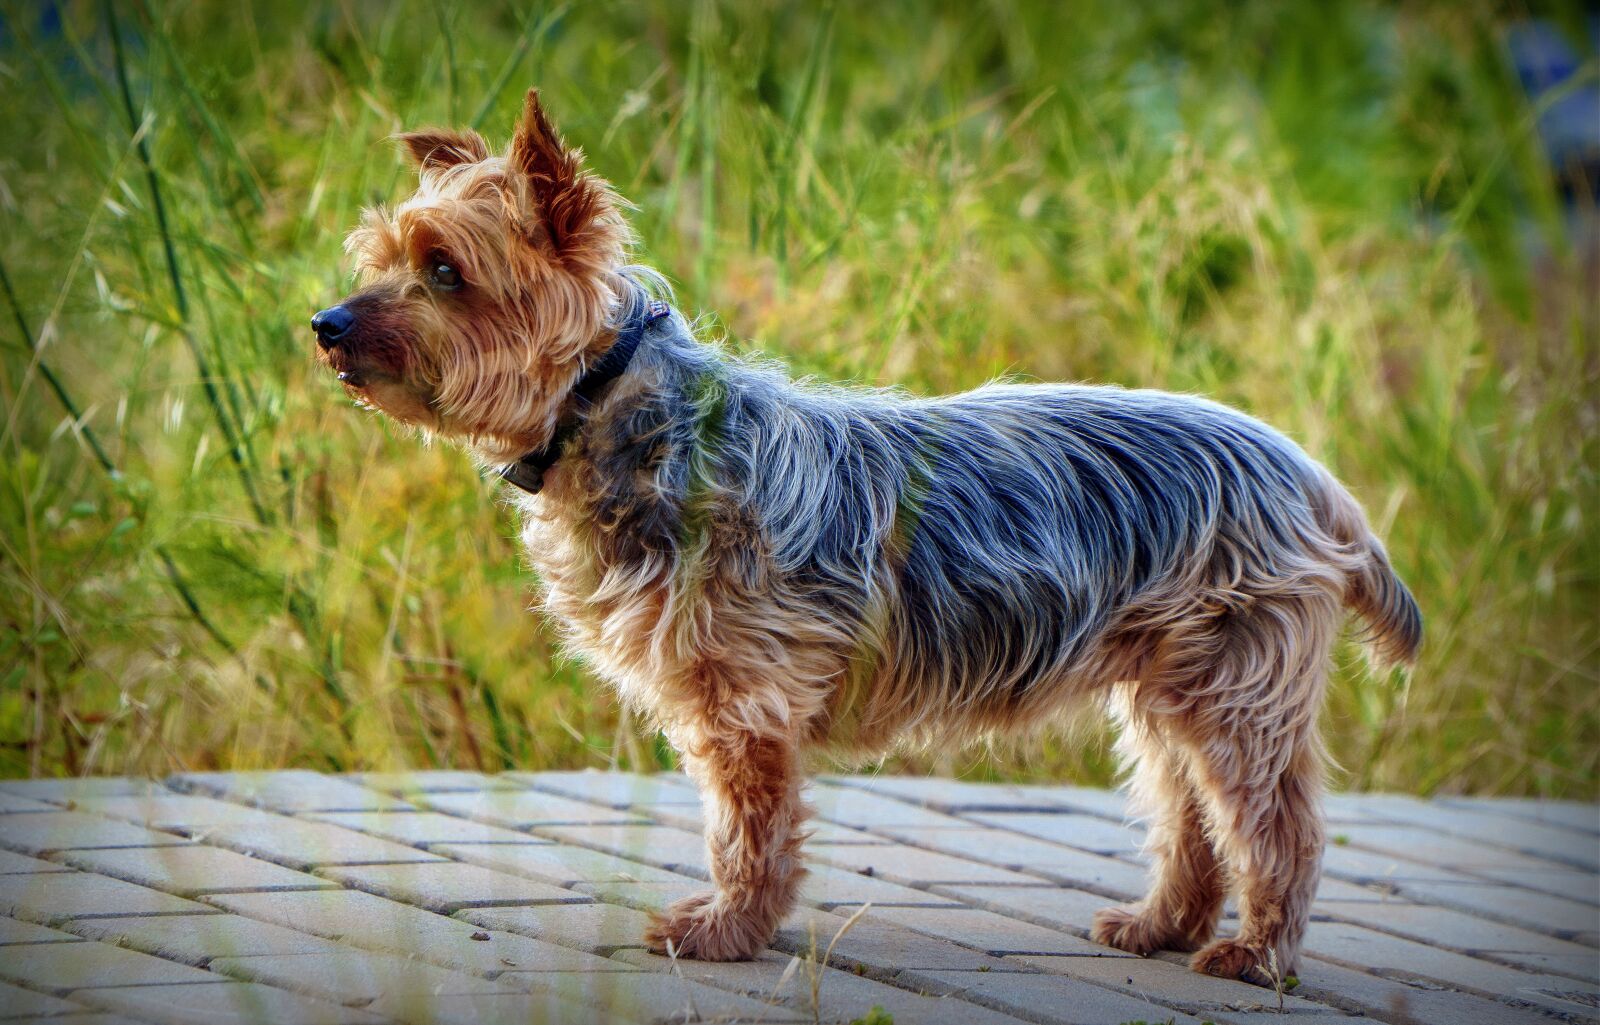 Sony E PZ 18-105mm F4 G OSS sample photo. Yorkshire terrier, dog, pet photography